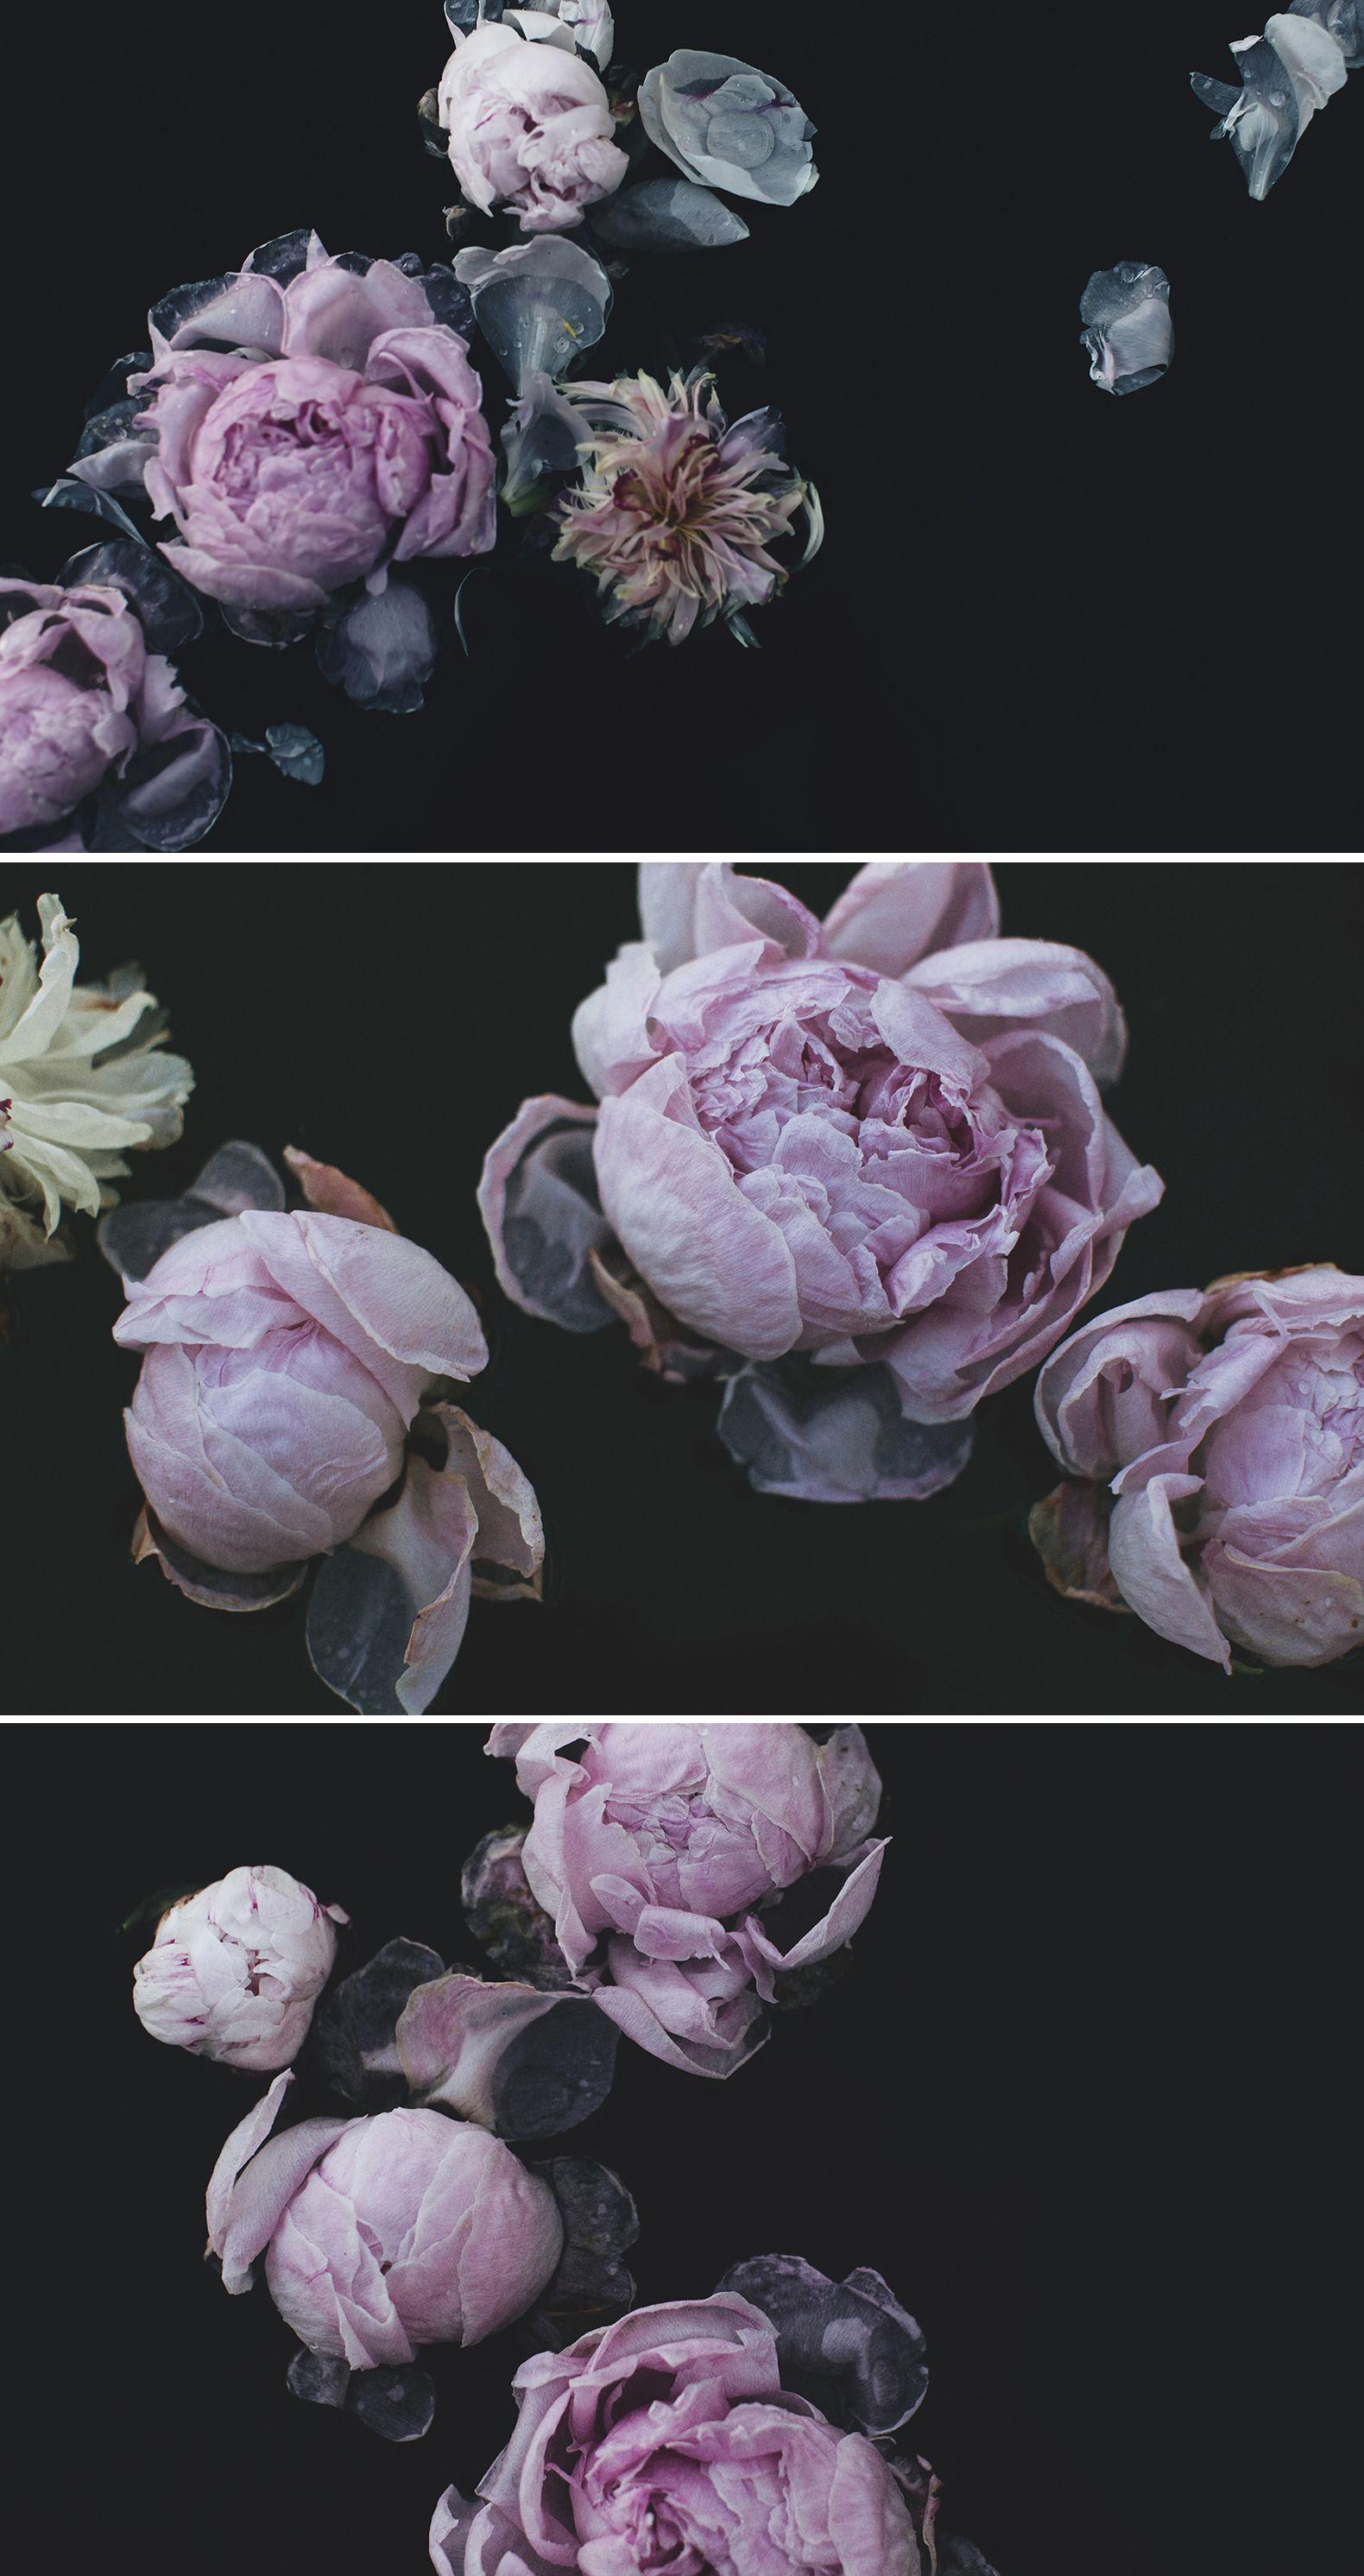 Dark Floral Wallpapers - Top Free Dark Floral Backgrounds - WallpaperAccess